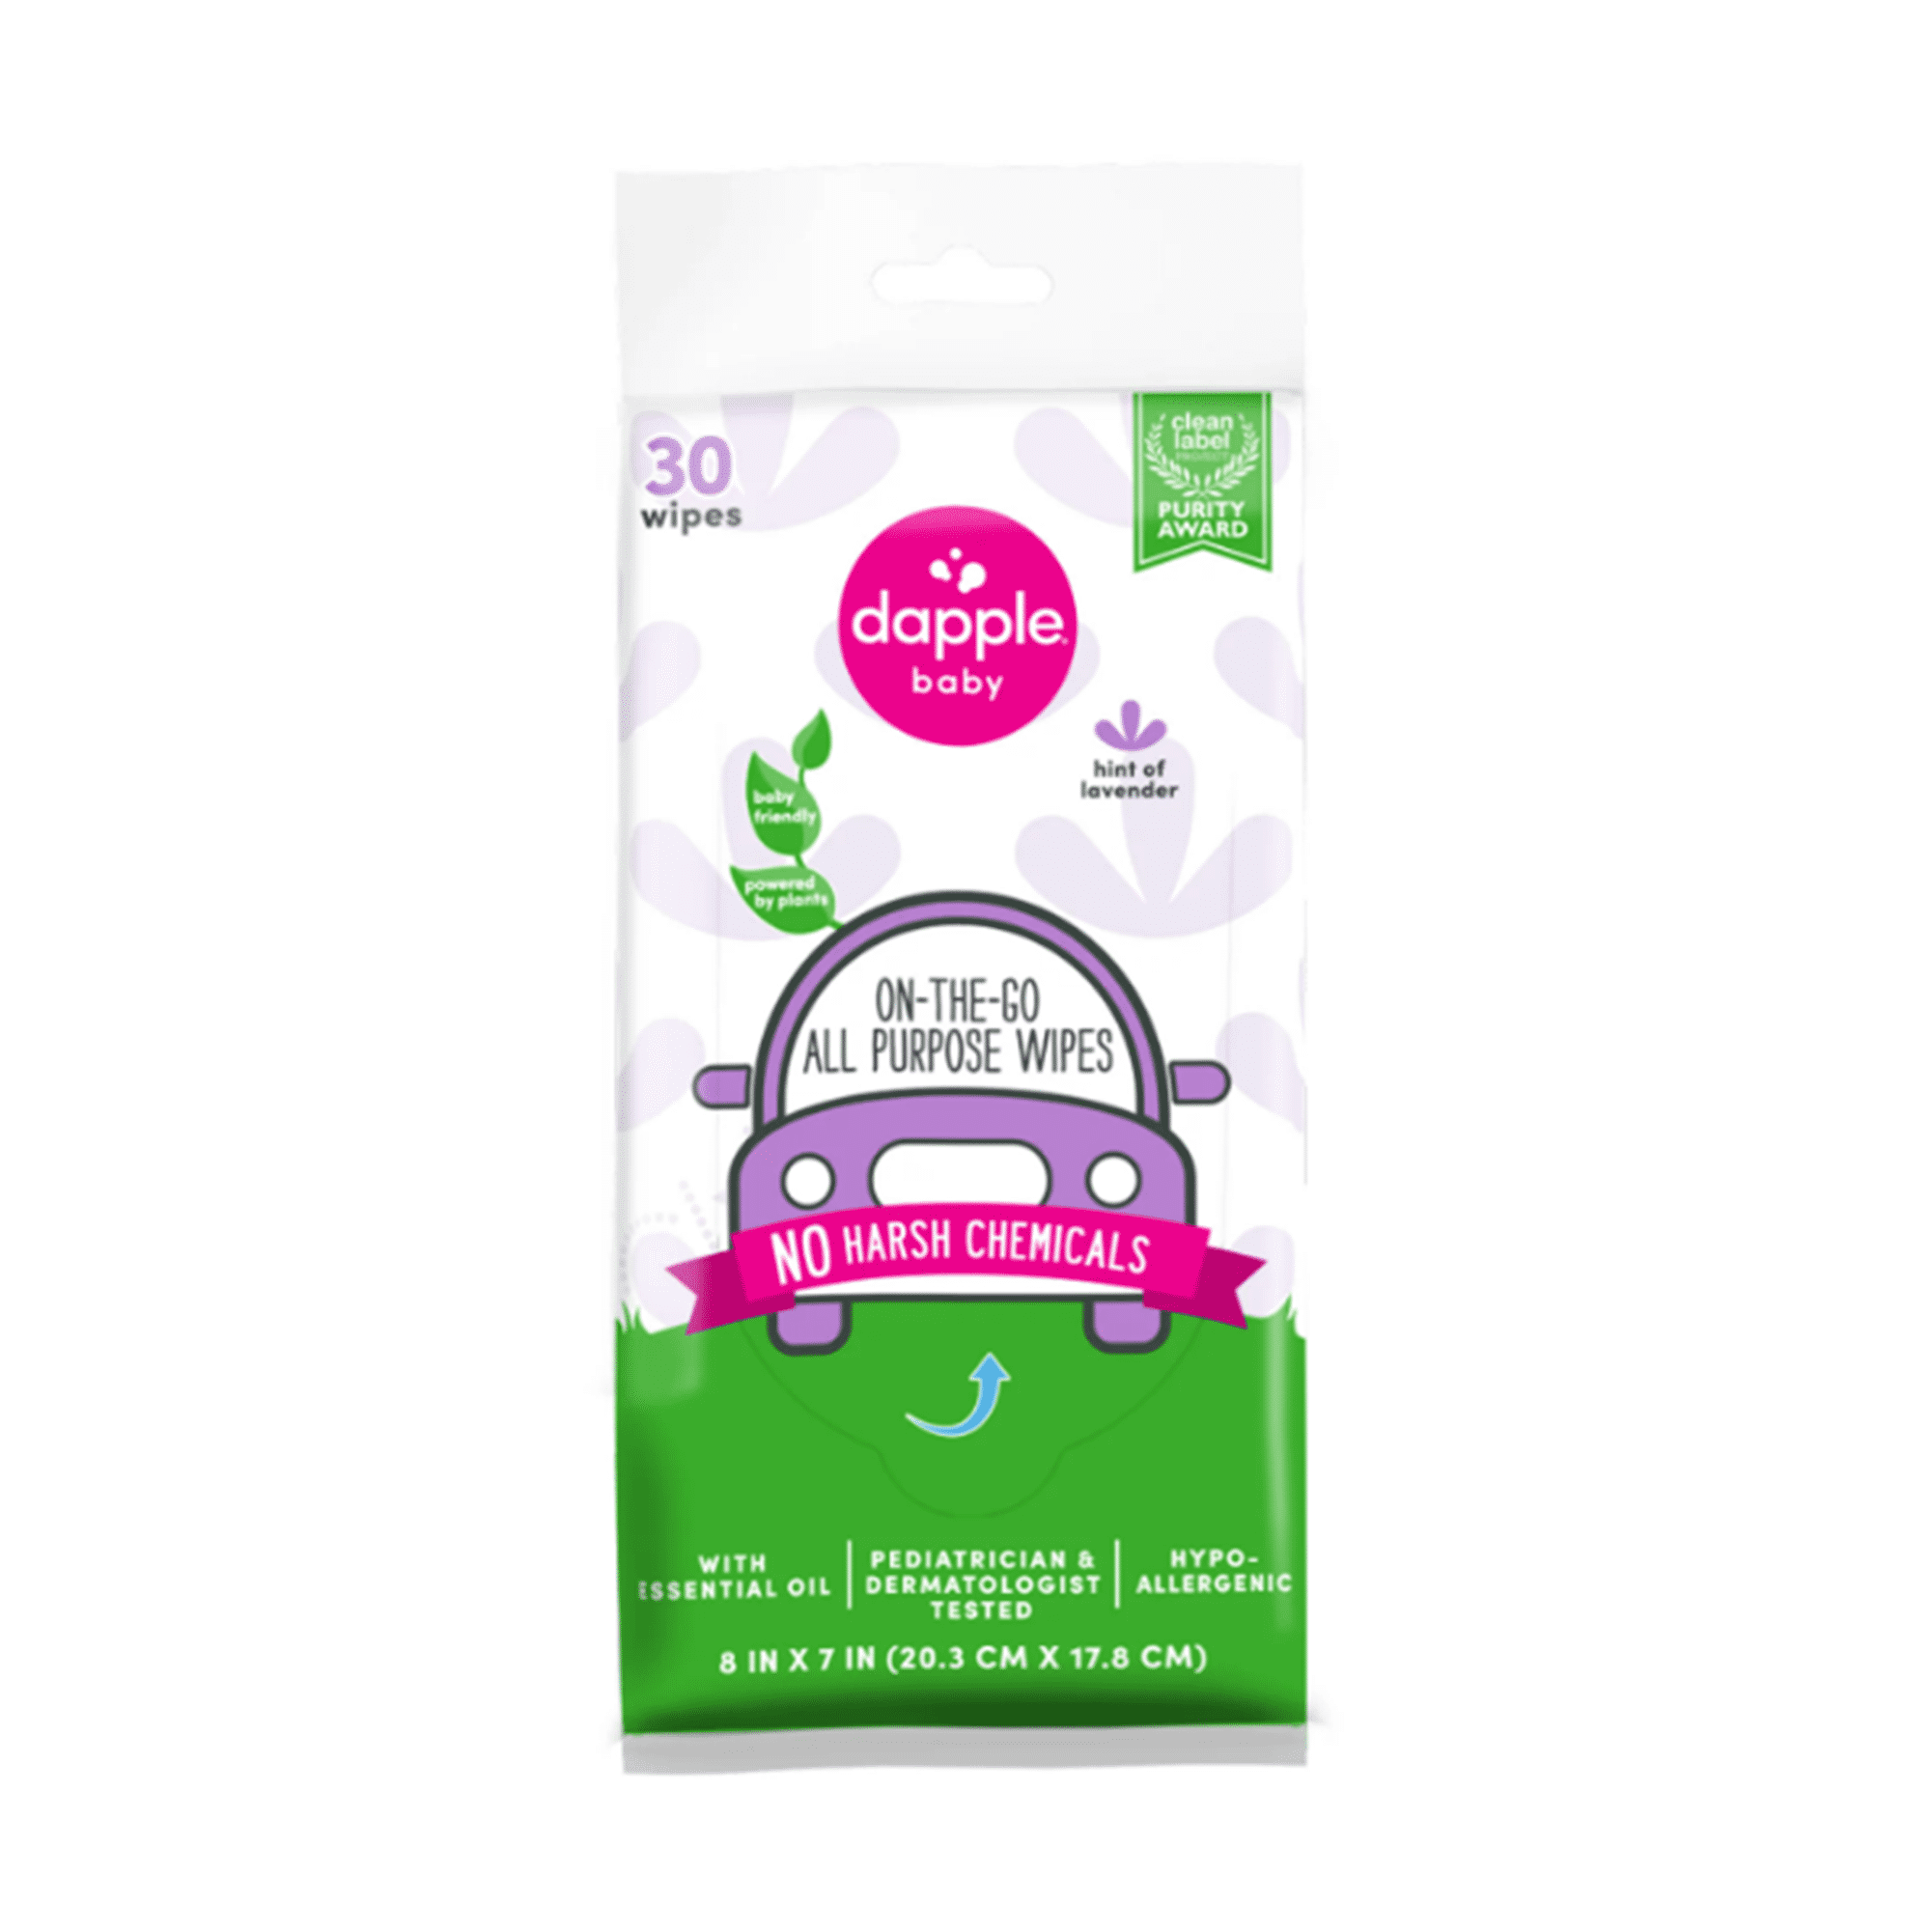 Dapple Baby Fragrance Free All Purpose Cleaning Wipes - Shop Surface Wipes  at H-E-B